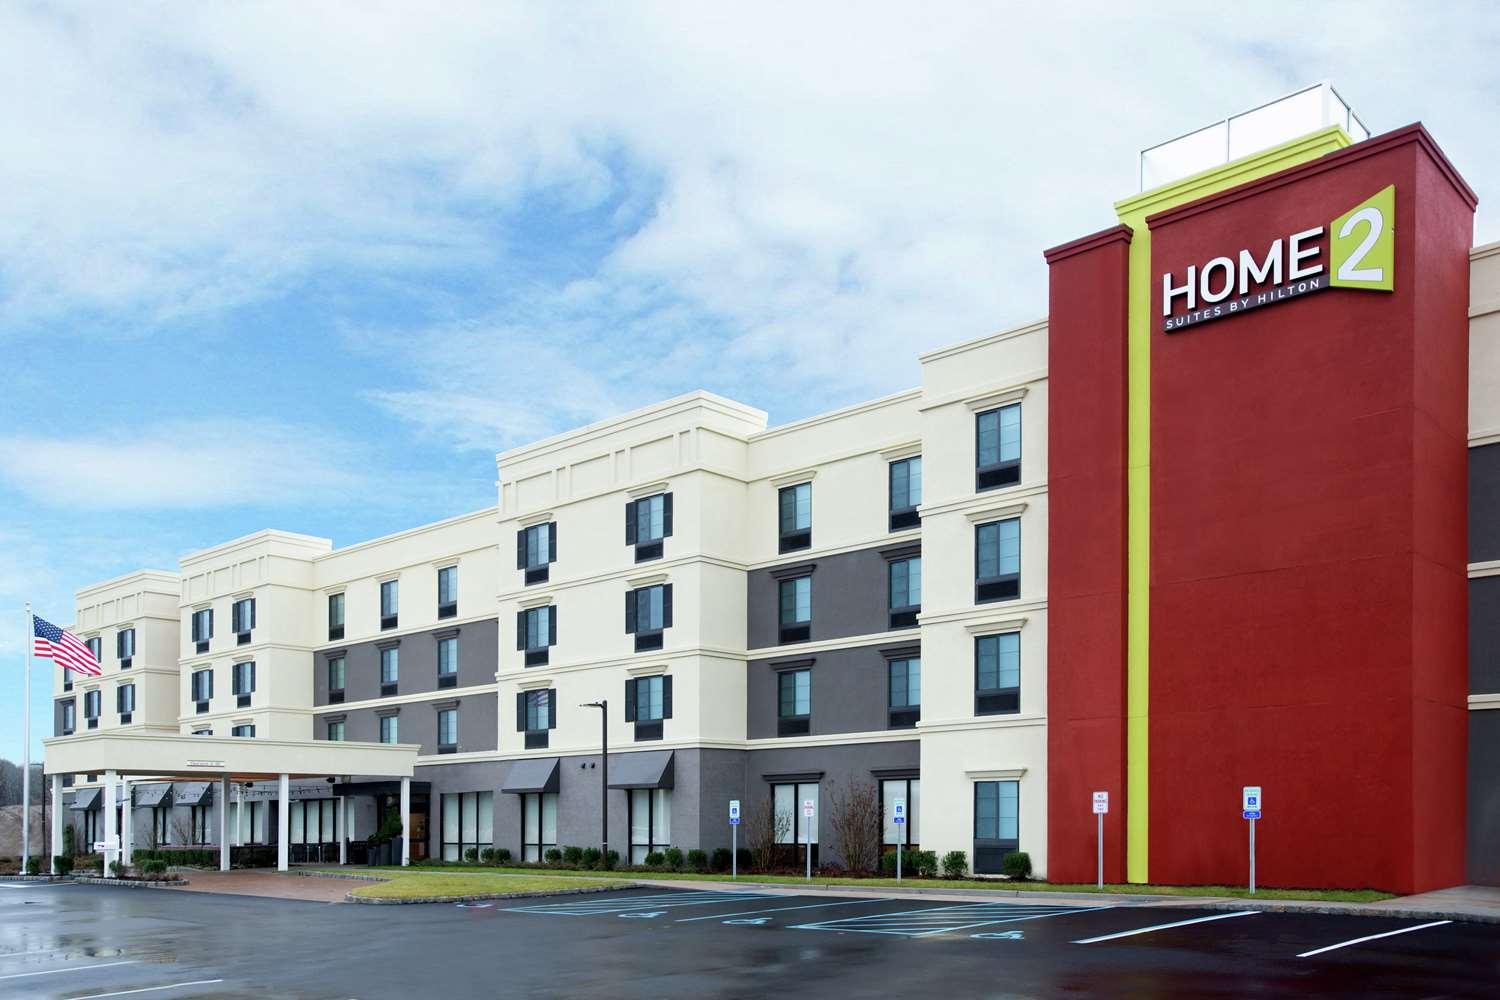 Home2 Suites by Hilton Long Island Brookhaven in Yaphank, NY